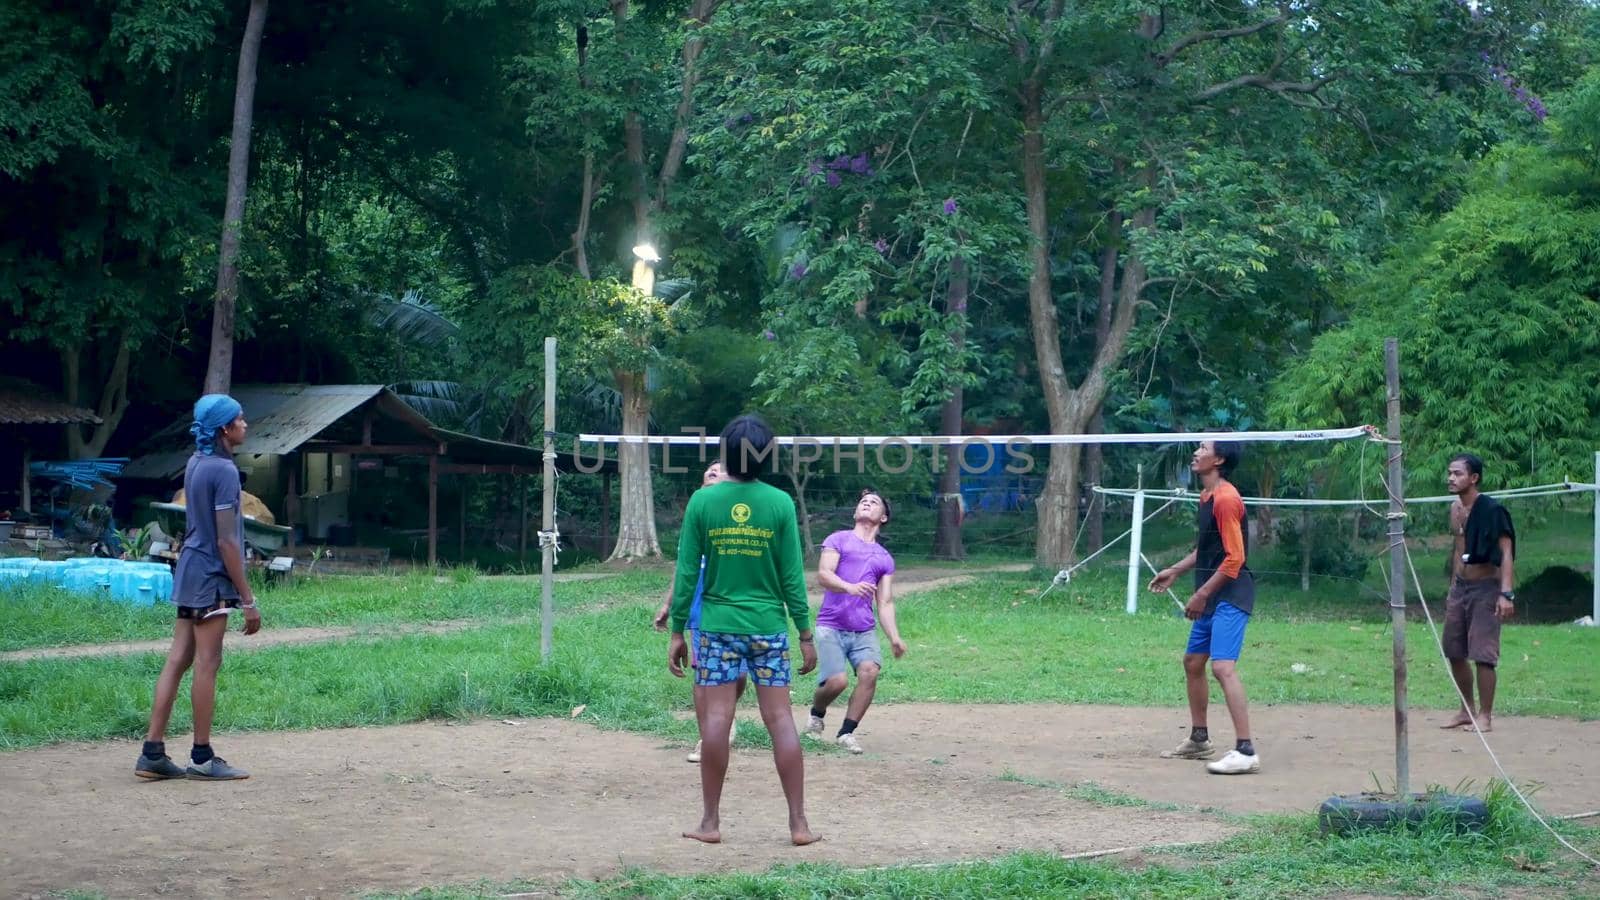 ANG THONG, THAILAND - 9 JUNE 2019: Thai teenagers playing sepak takraw in park. Group of men playing kick volleyball against green trees in yard in local settlement. Traditional national sport game by DogoraSun